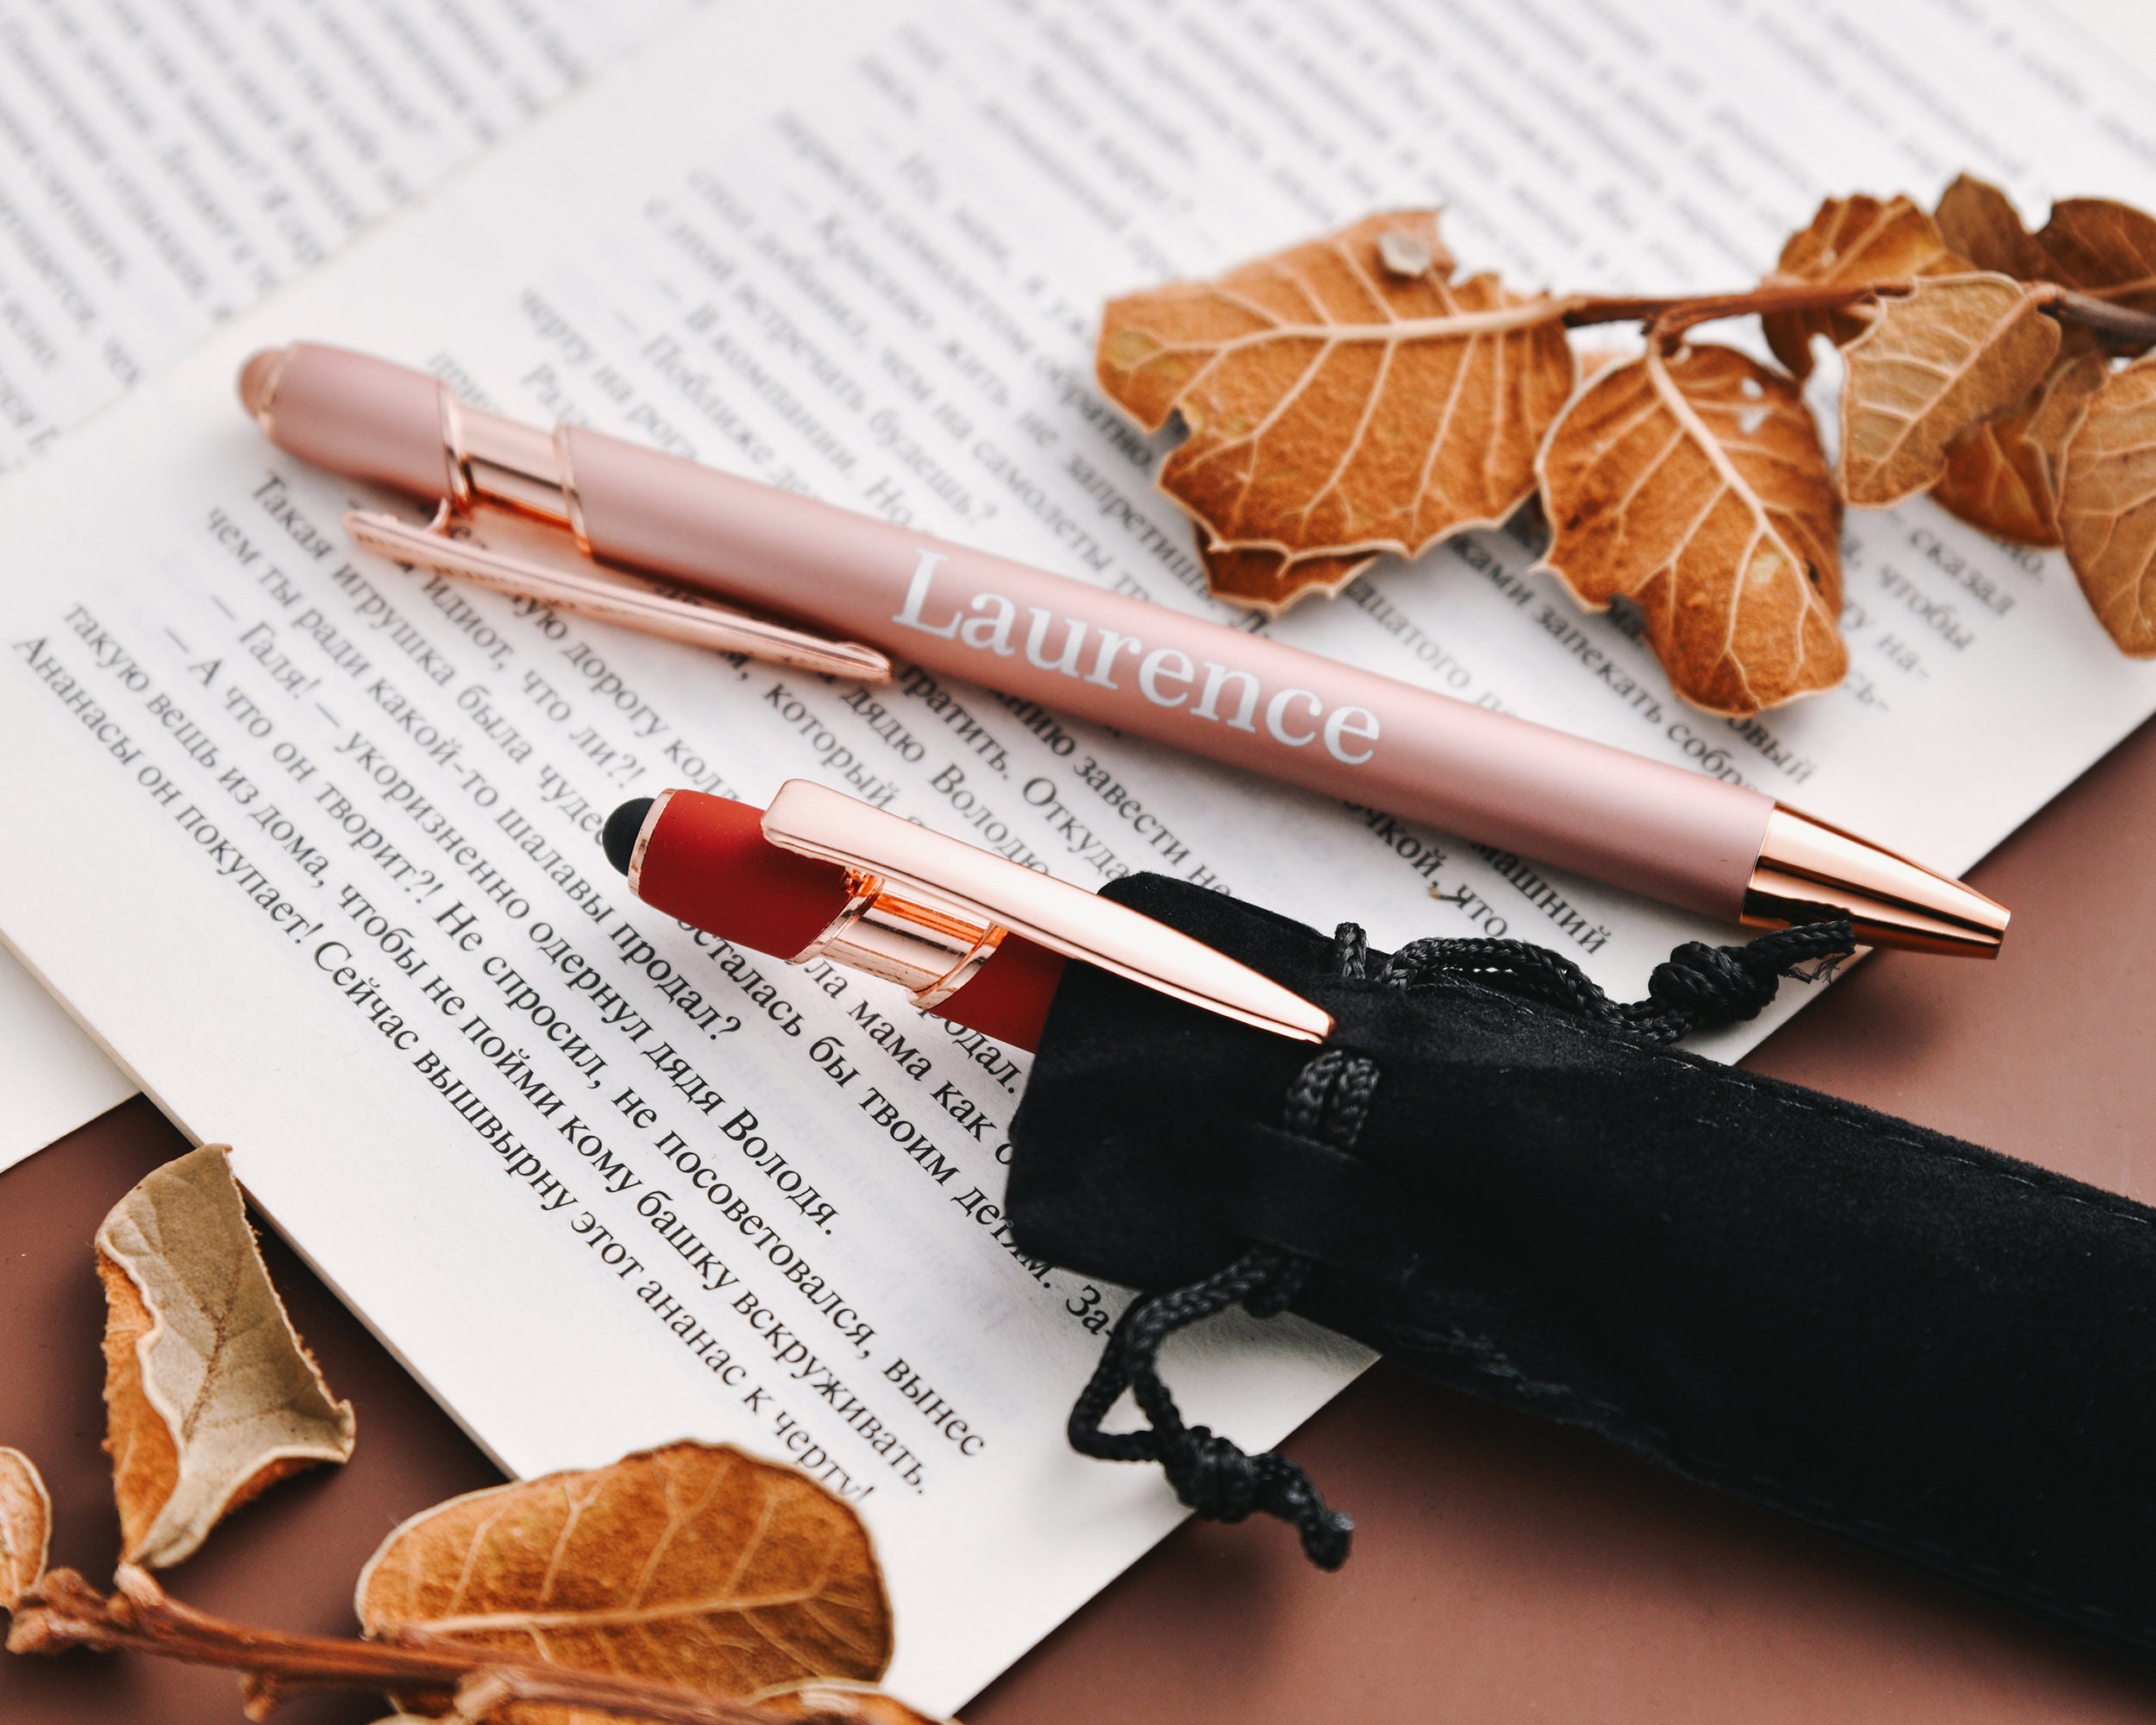 Sealing Wax Coloring Pen, Wax Seal Pen, Gold Silver White Rose Gold Wax  Printing Pen, Paint Pen, Highlight Colorful Pen, Tracing Line Pen 